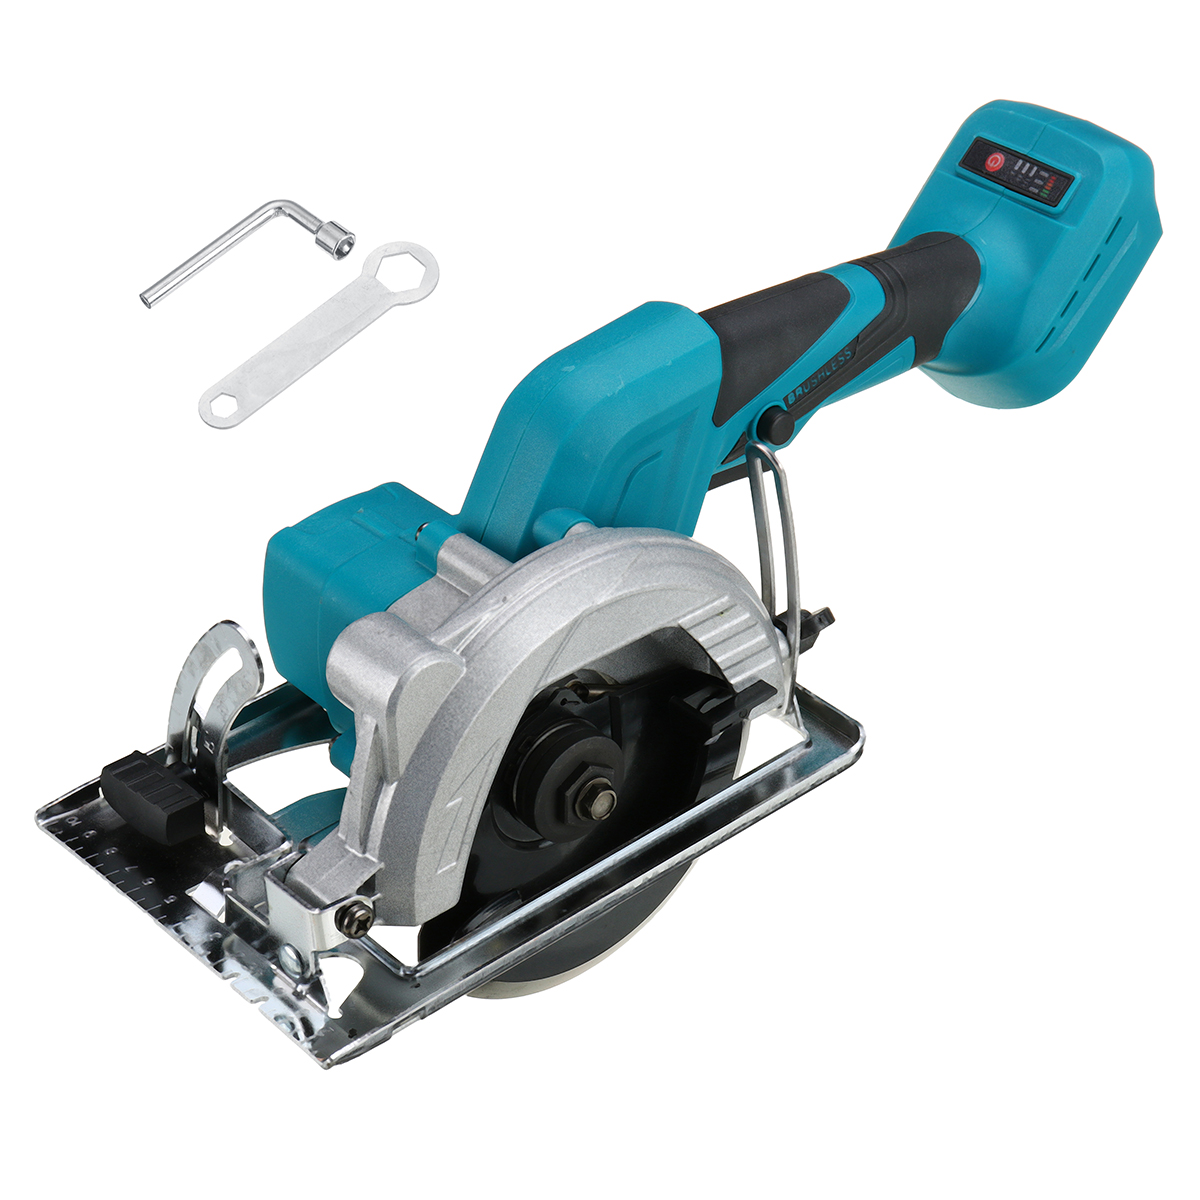 5-Inch-Rechargeable-Electric-Circular-Saw-Portable-Cutting-Sawing-Machine-W-1pc-Battery-1843019-1